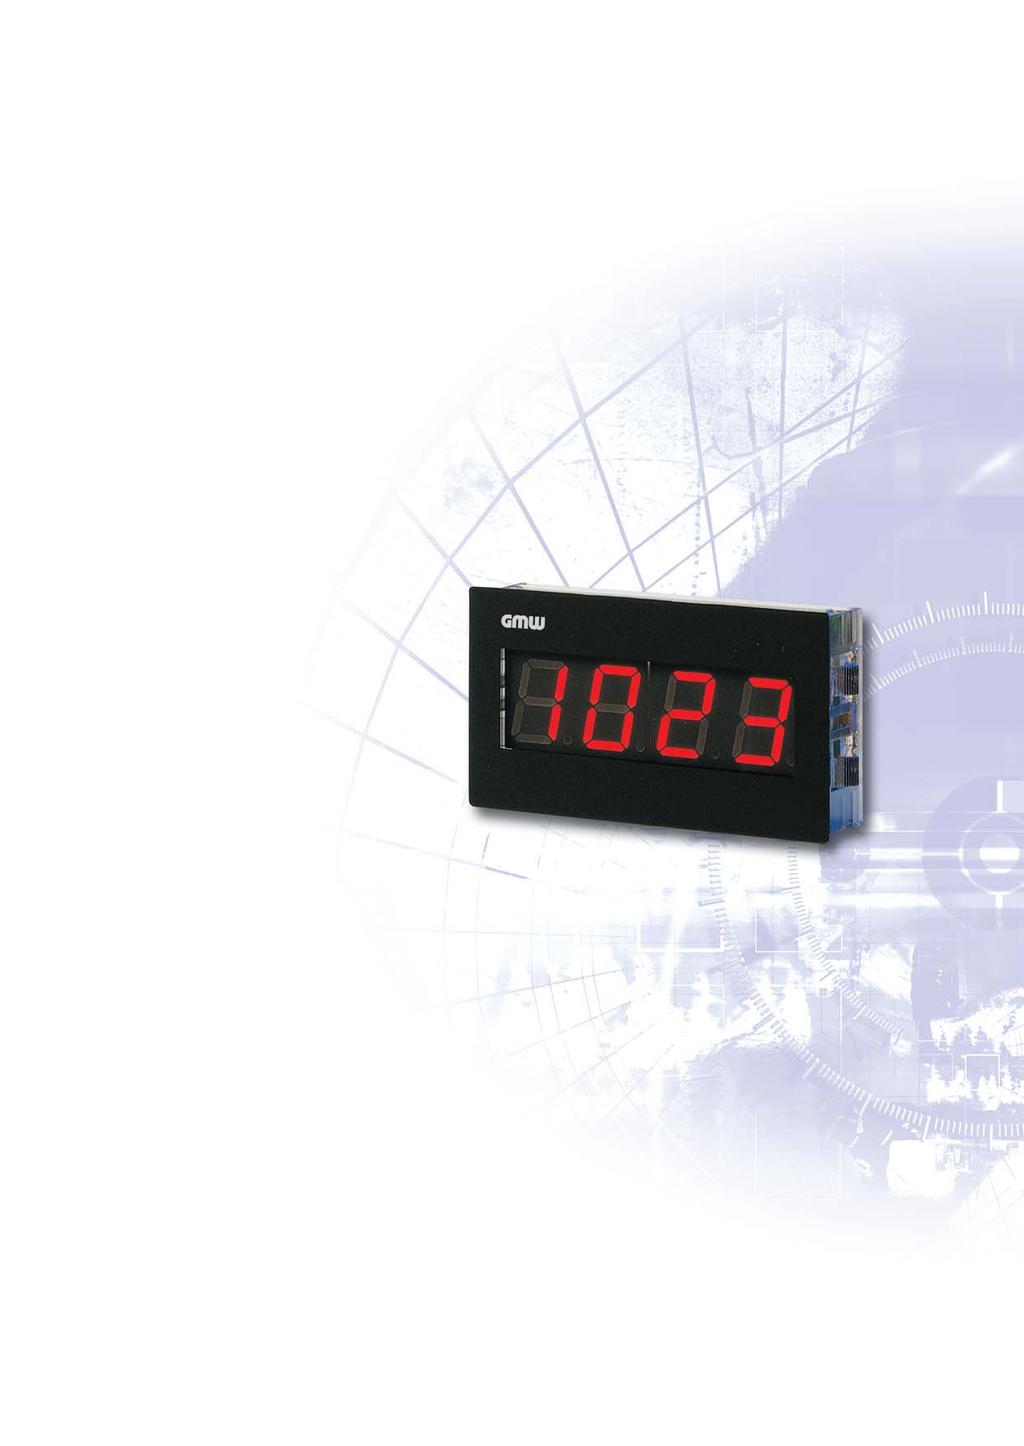 DIGEM 62 x 38 A5 3.5 Place Digital Indicator with LED or LCD A1155 range: ± 1 999 Minimal installation depth of only 26.